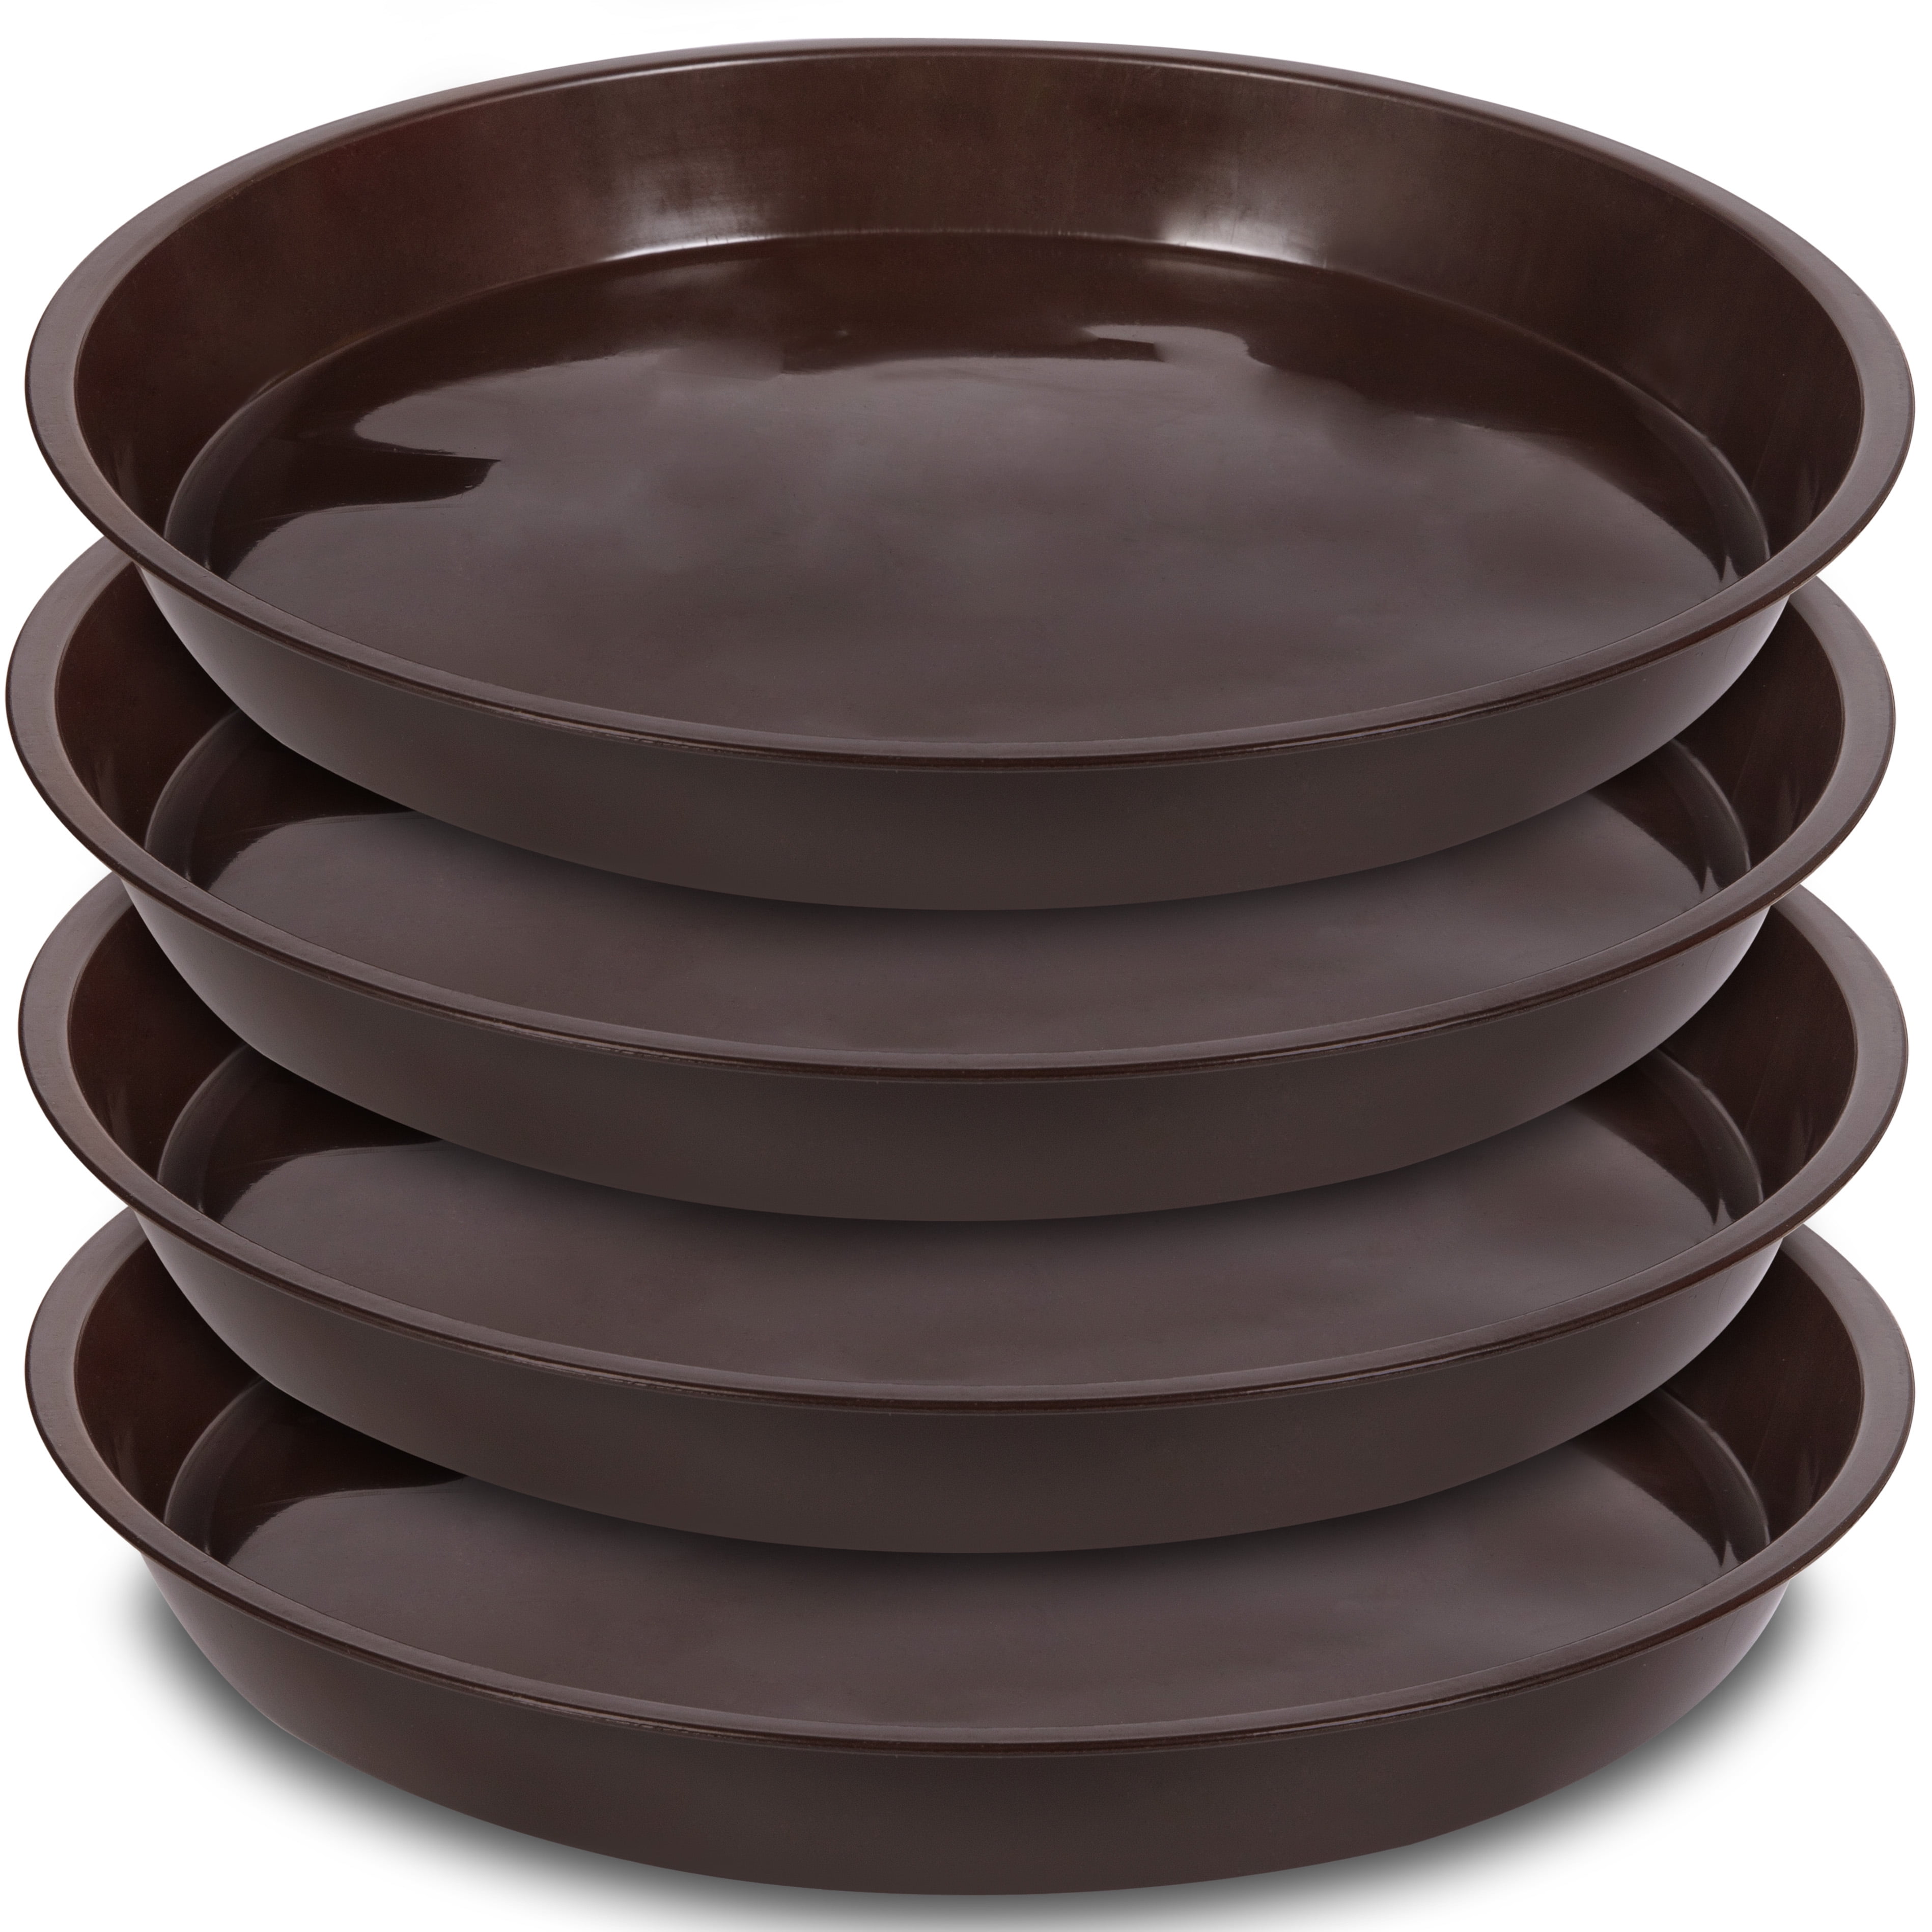 Classic Round Planter Saucer 24-Inch Flower Pot Drip Trays for Planters Pairs w/ 24 Clay Classic Planter LIA24000E35 Clay 